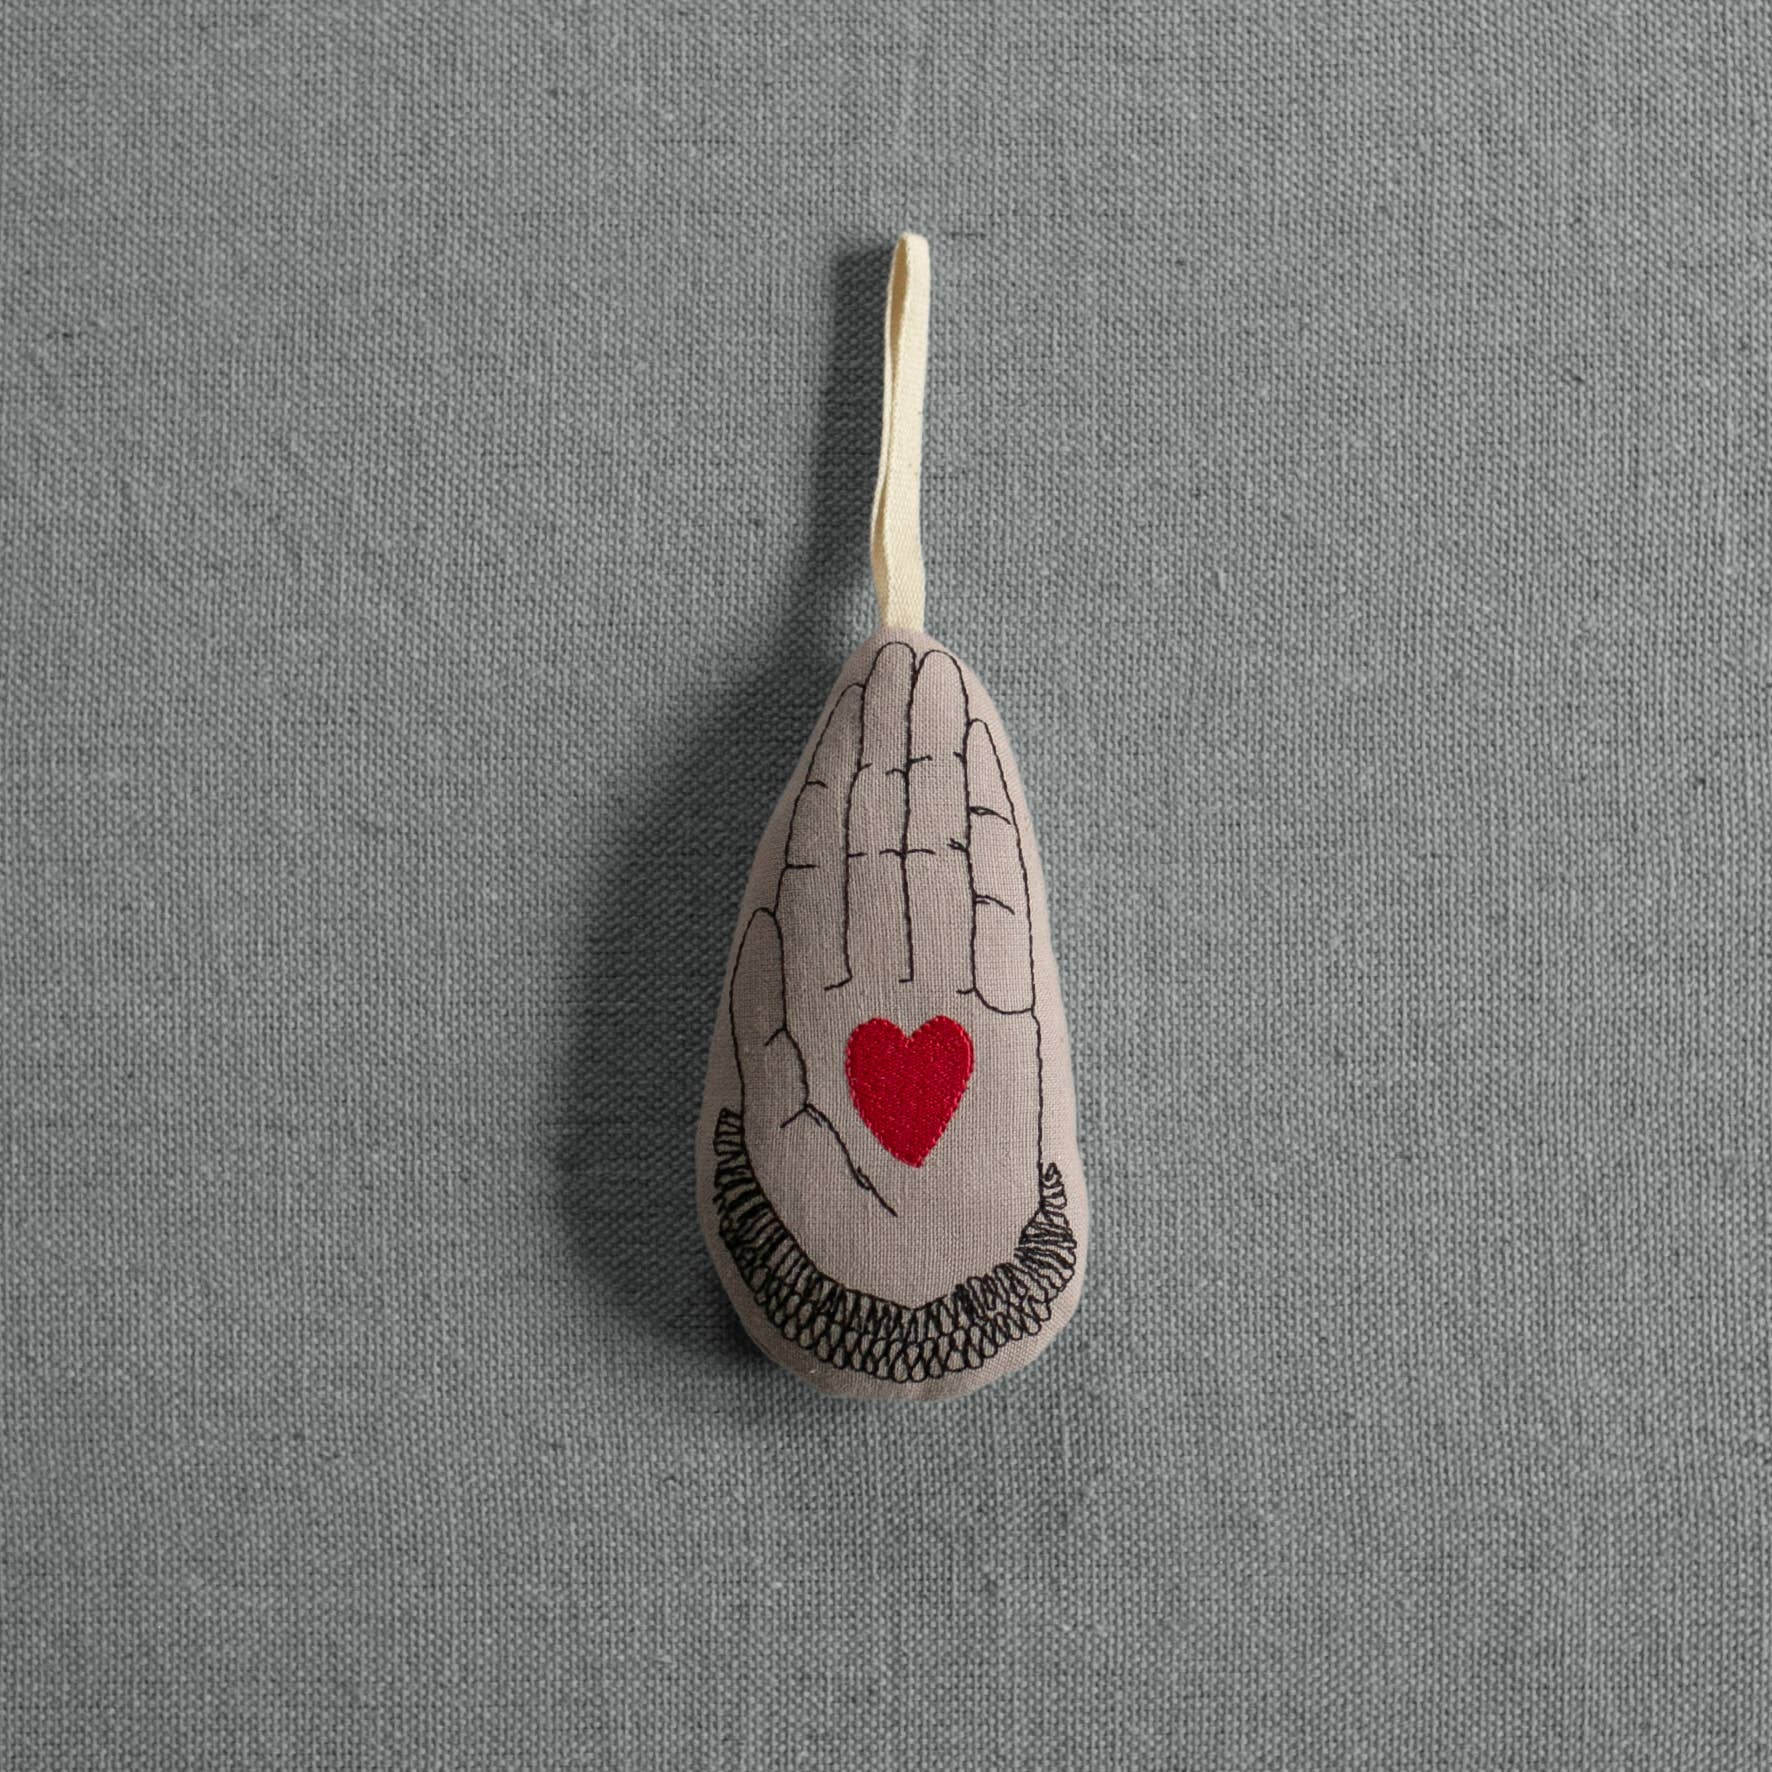 Heart in Hand - Cotton & Lavender filled Ornament